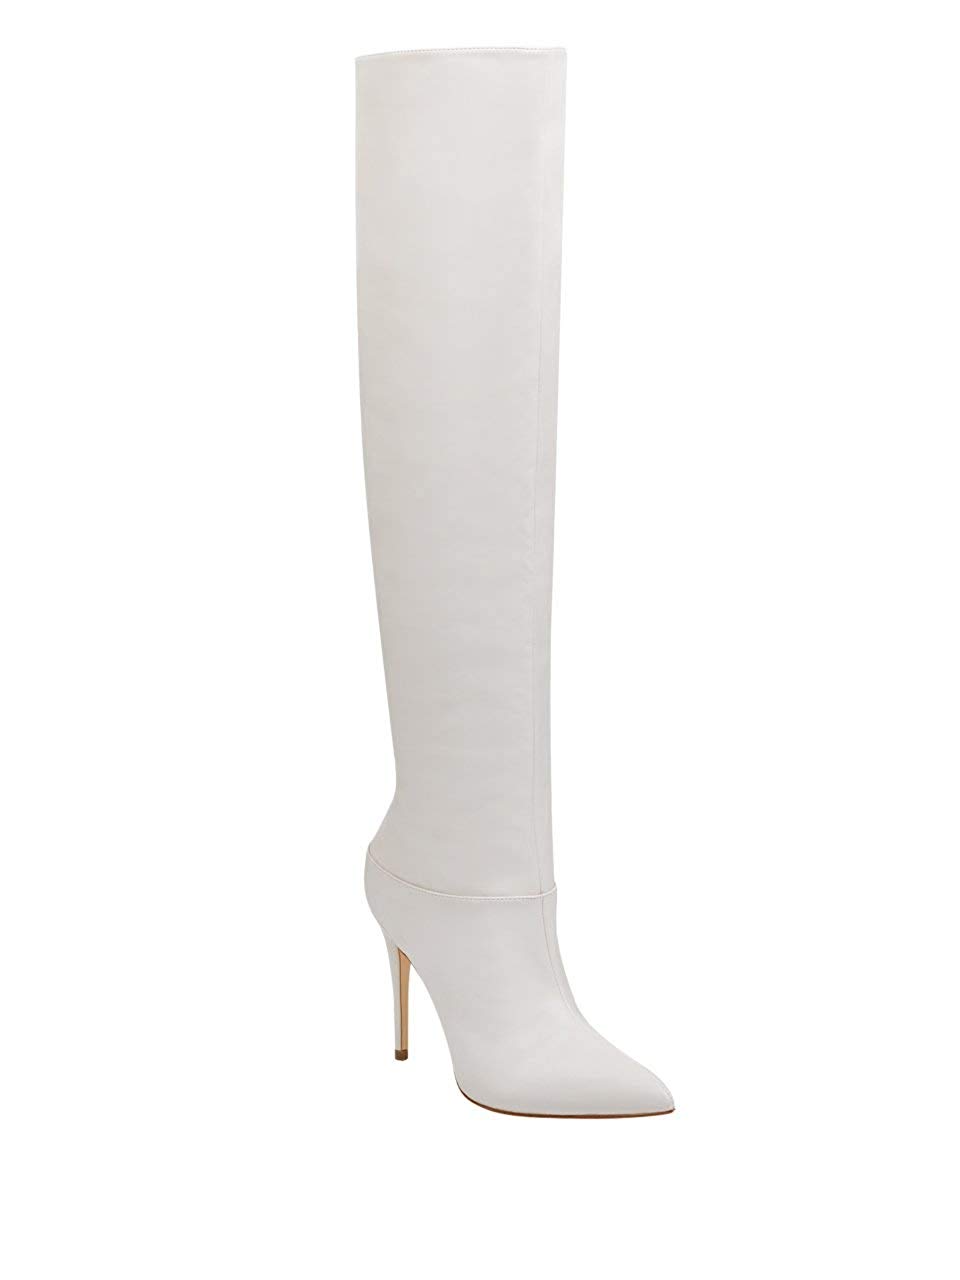 Guess Womens Orianna2 Pointed Toe Over Knee Fashion Boots, Ivory, Size ...